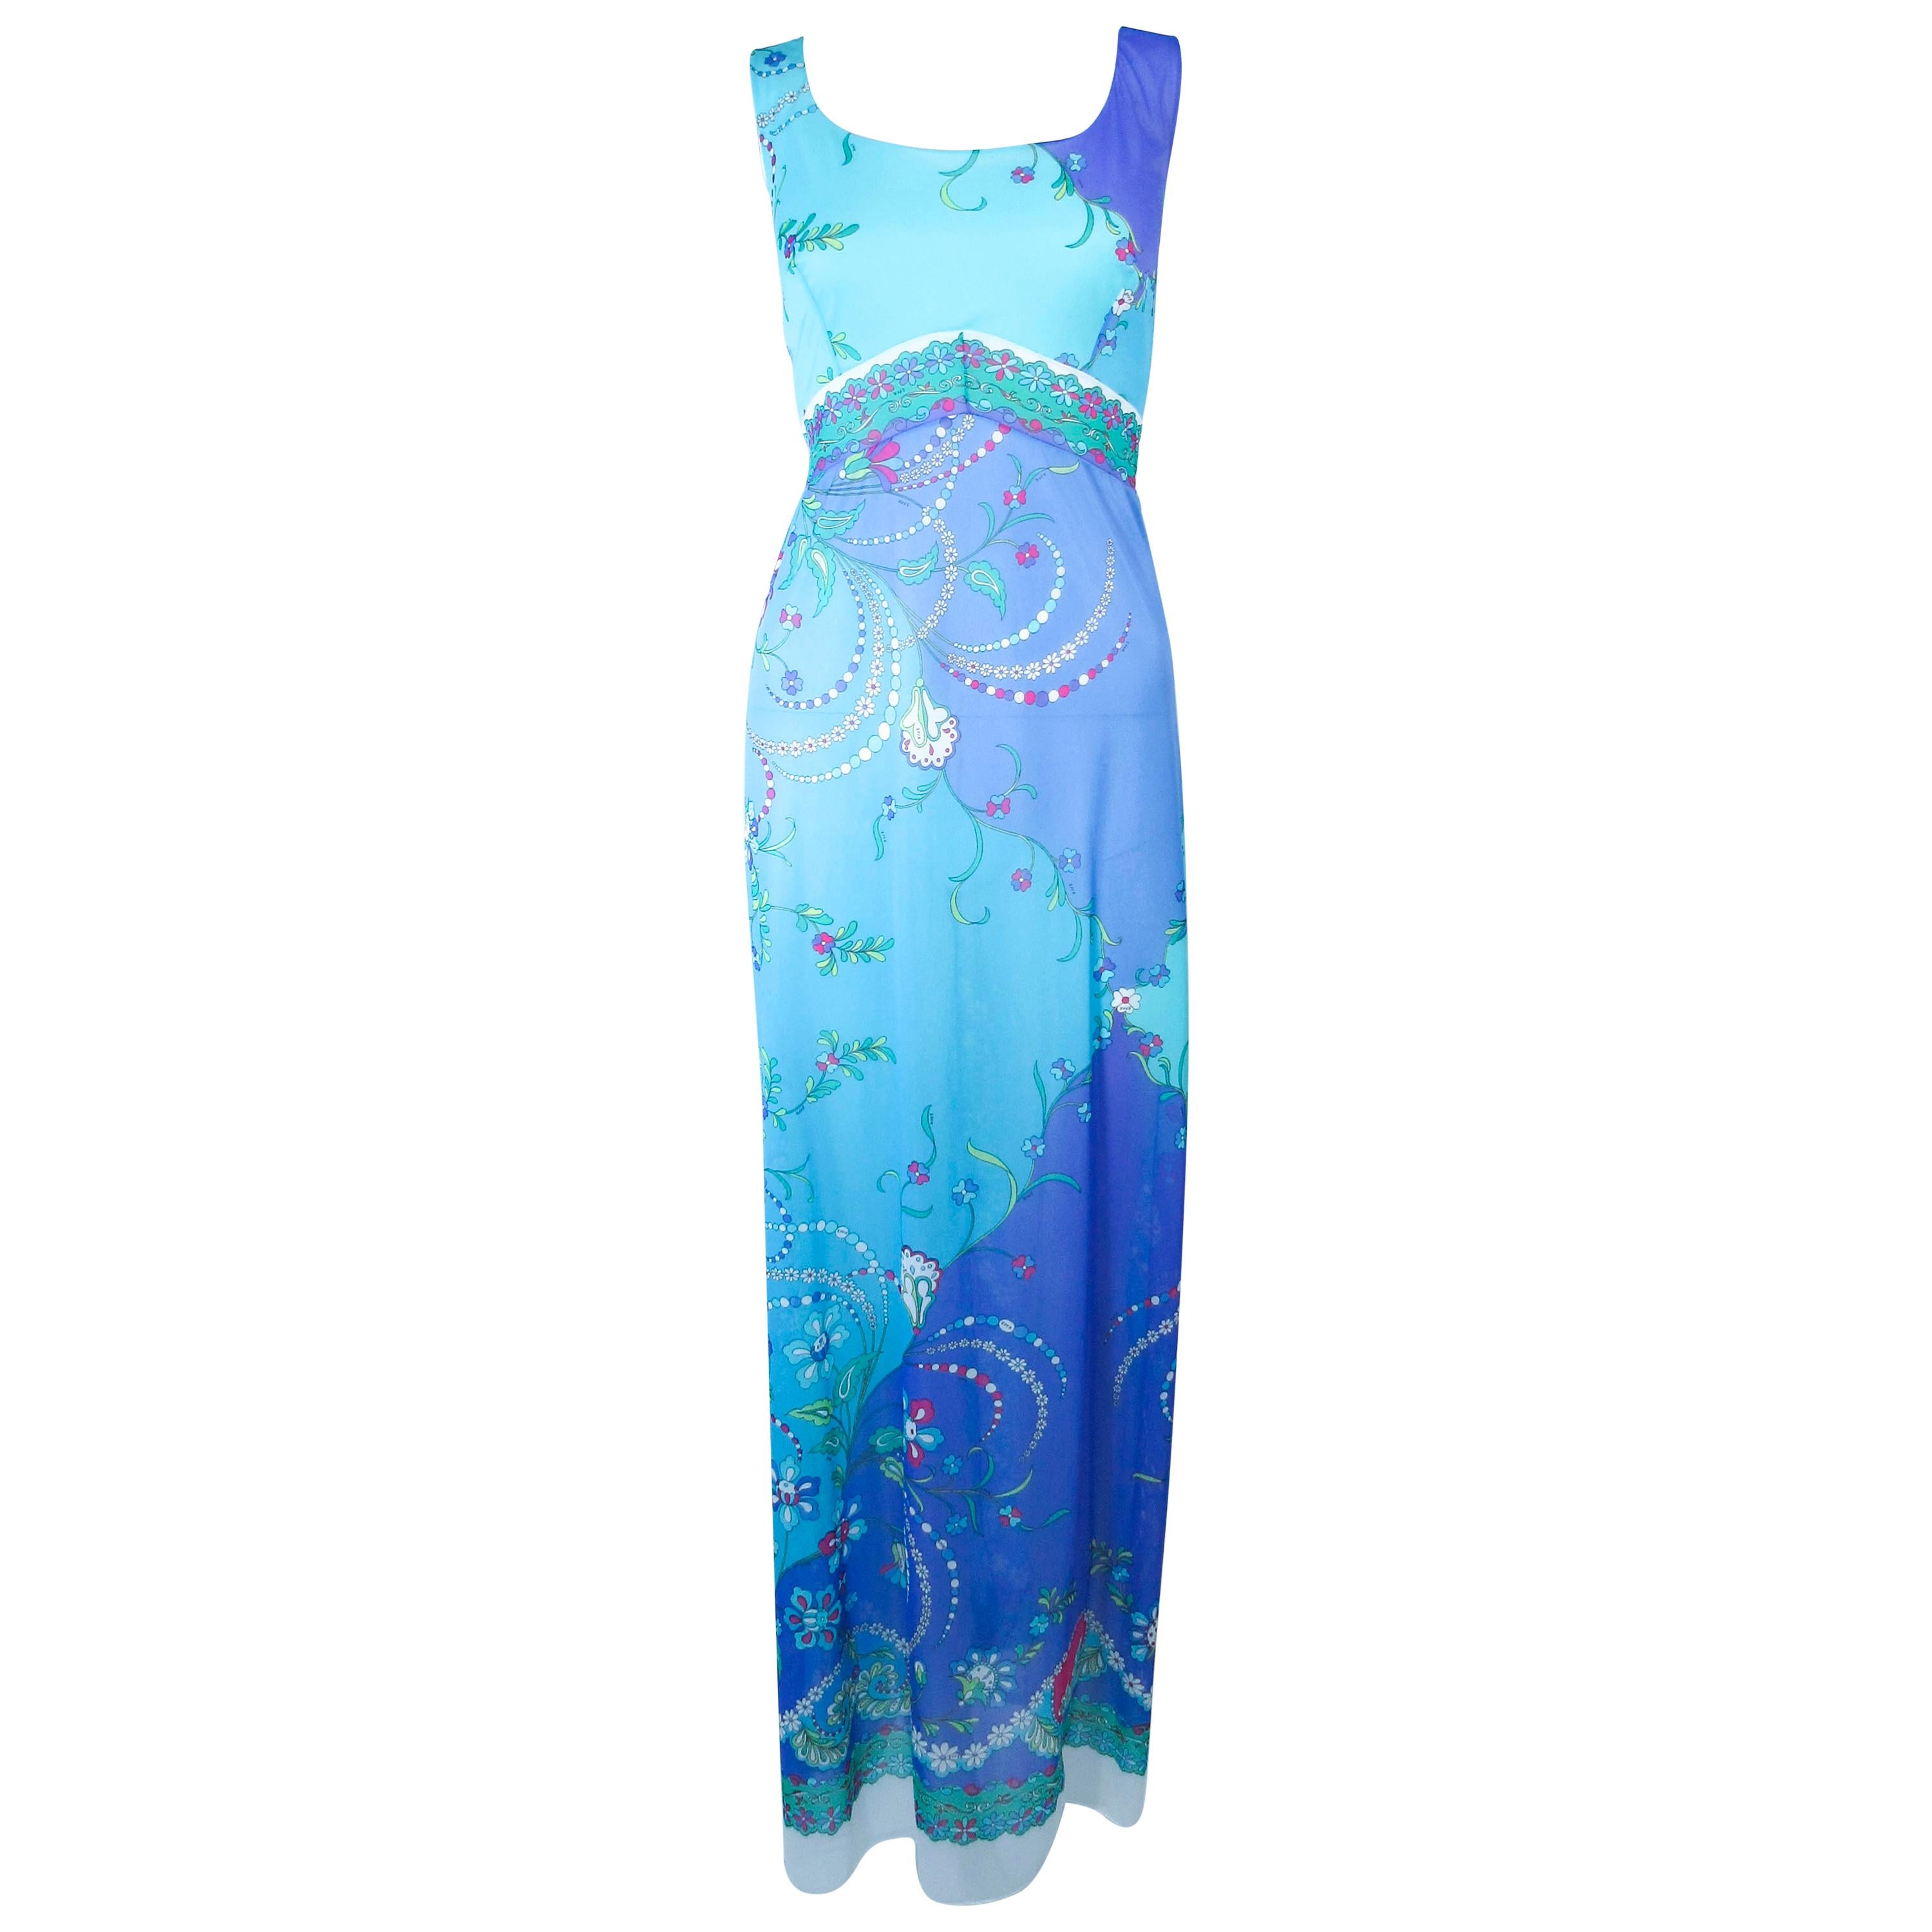 EMILIO PUCCI Light Blue and Purple Abstract Print Maxi Dress Size M 